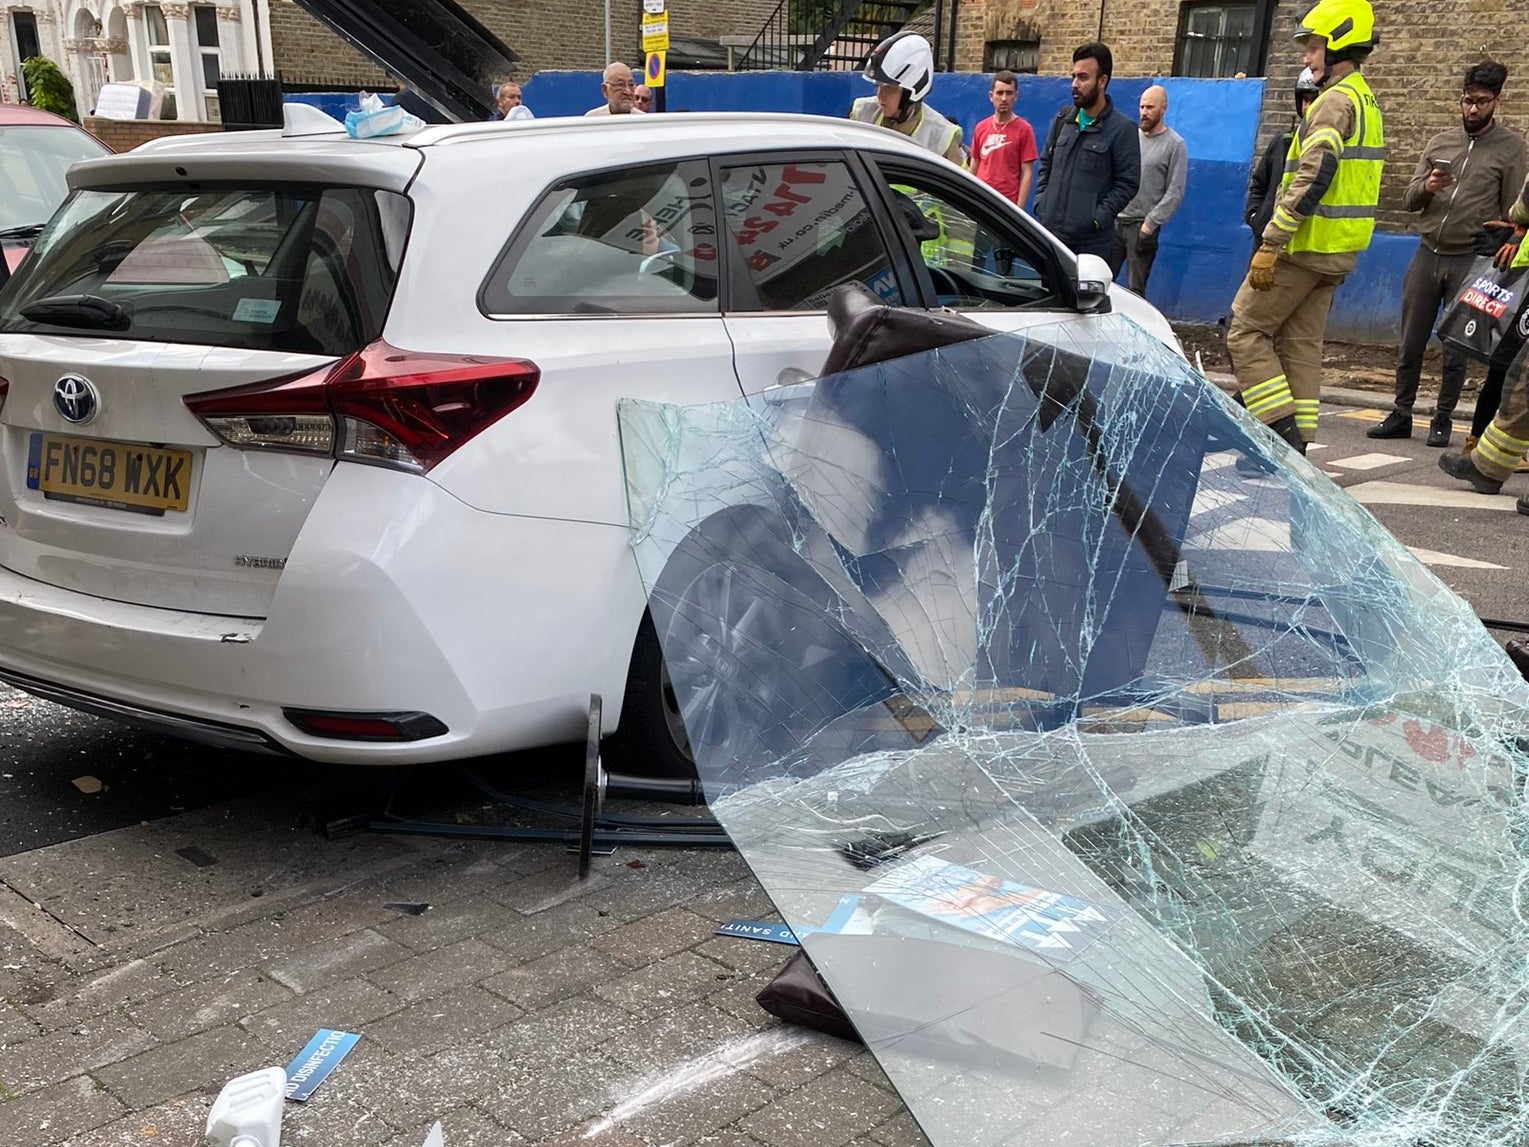 Authorities said a car crashed into a building in Walthamstow on Thursday